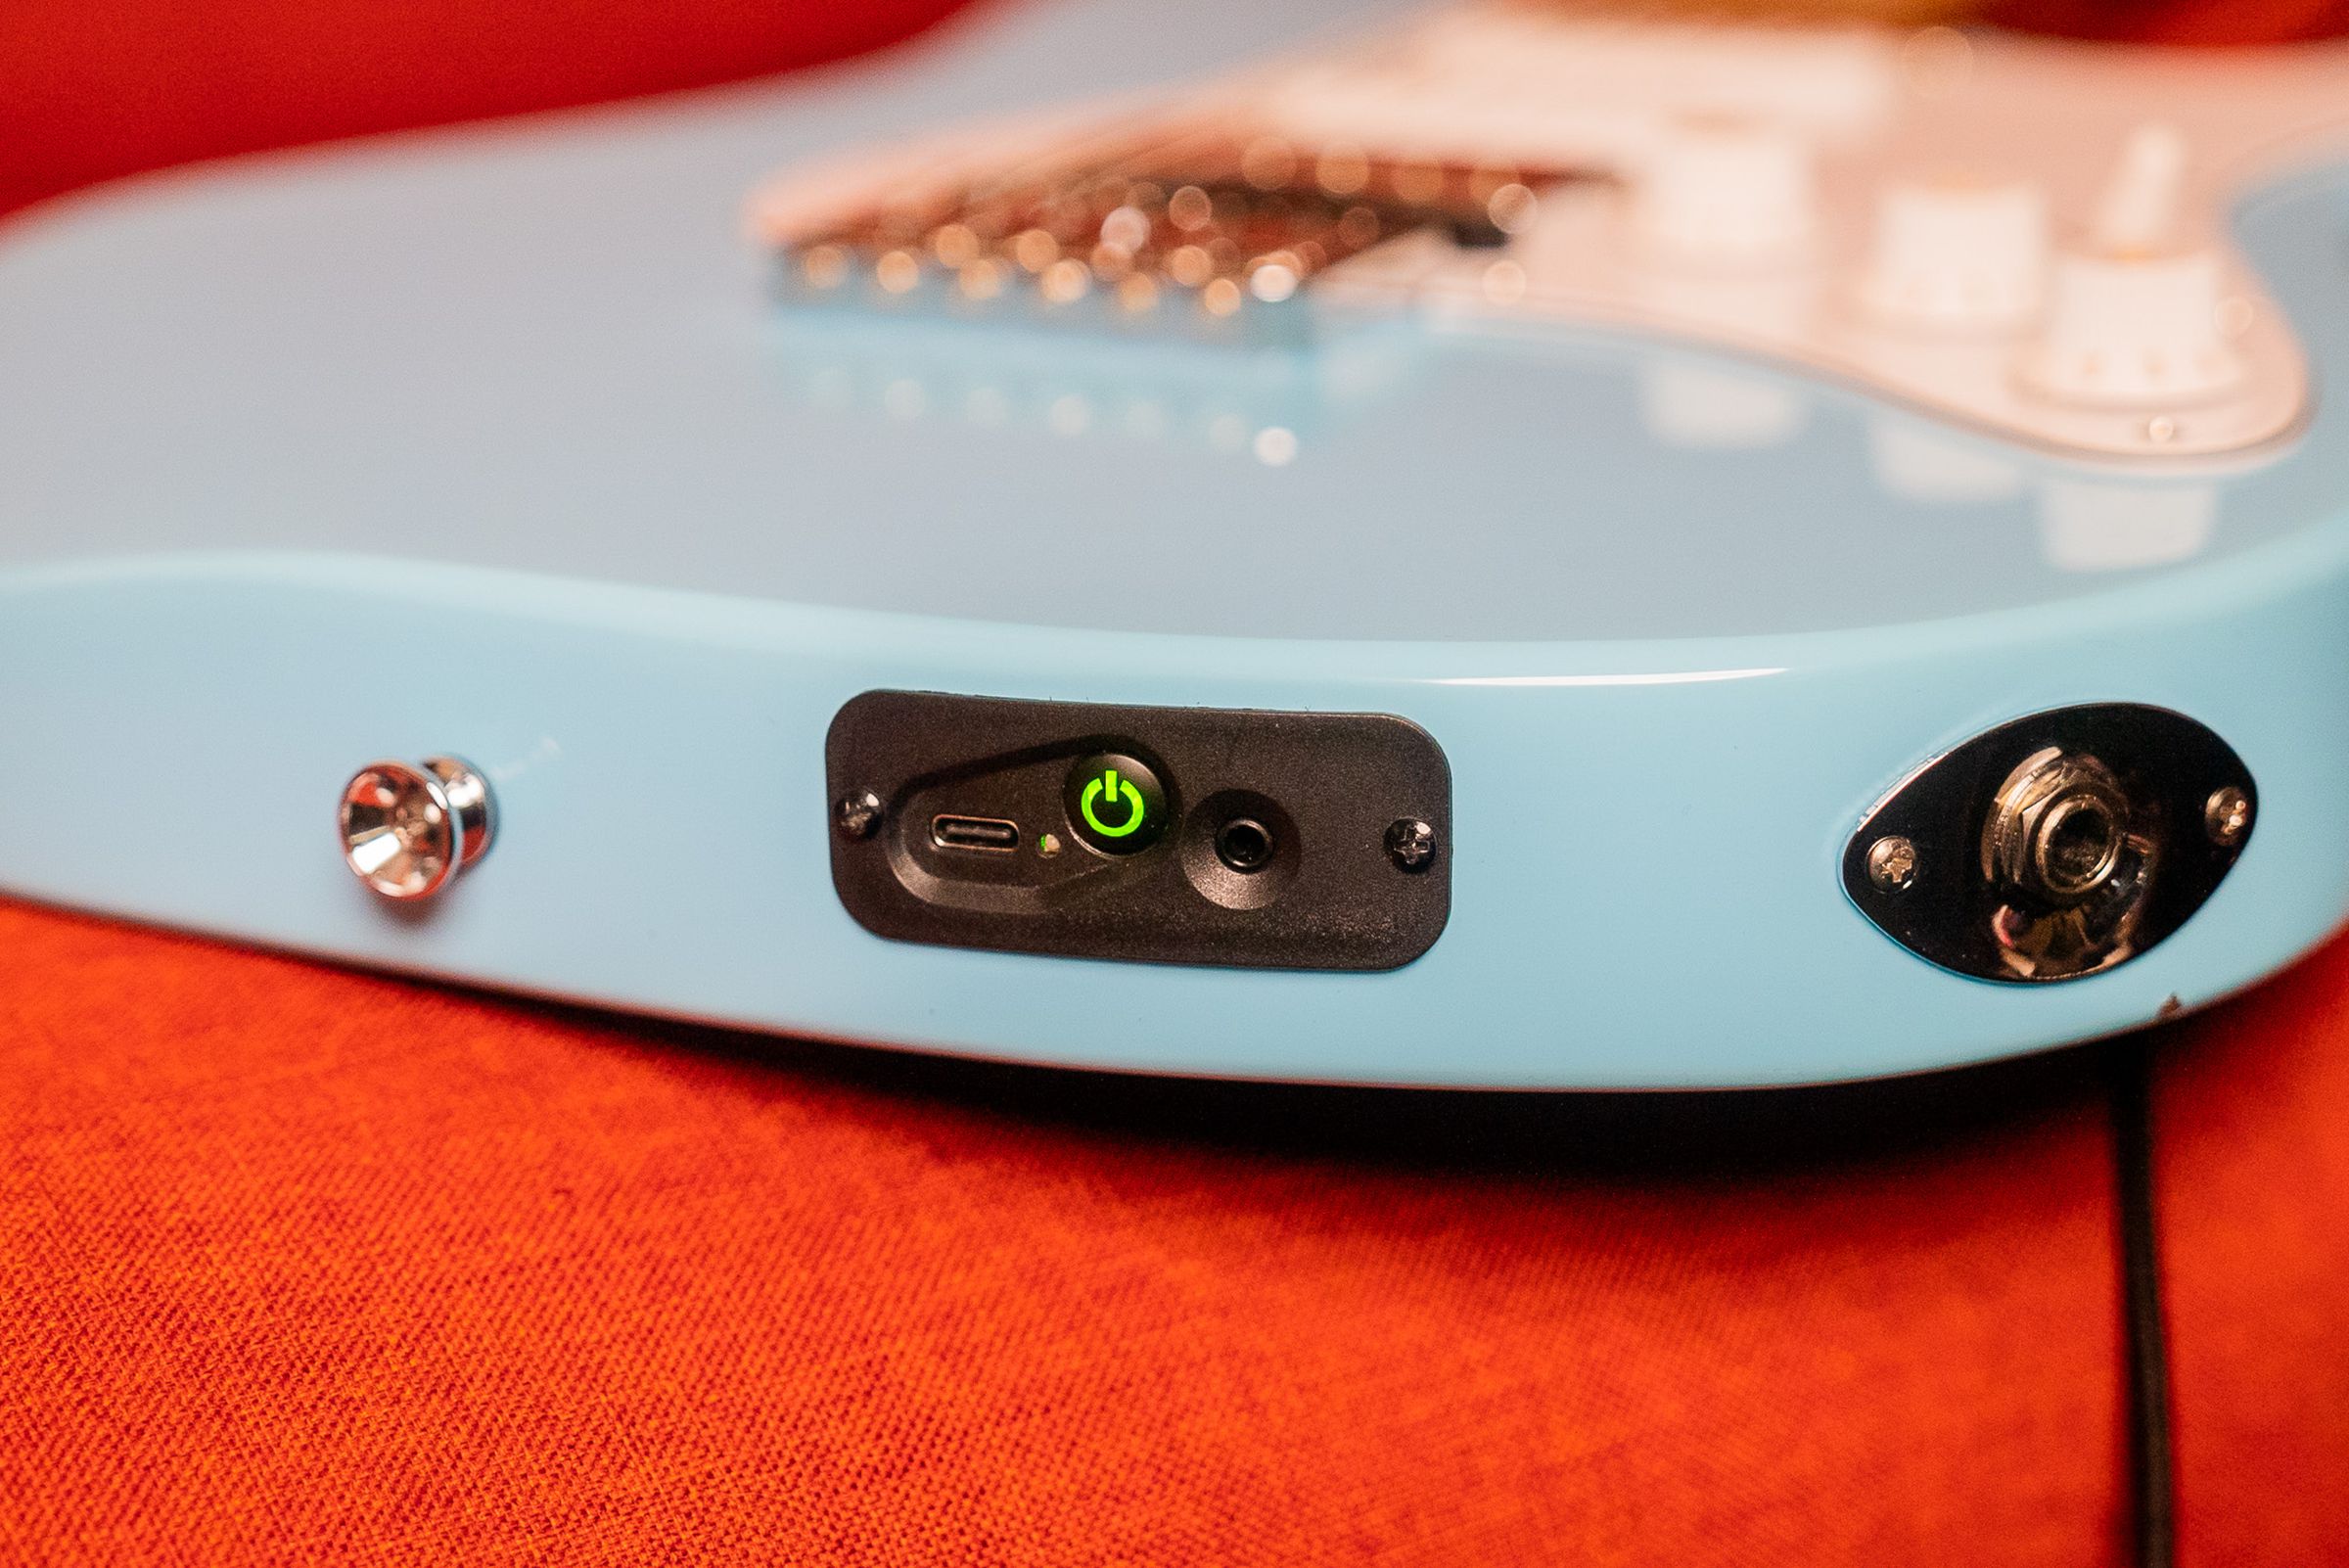 A view of the button of the guitar with both ports.